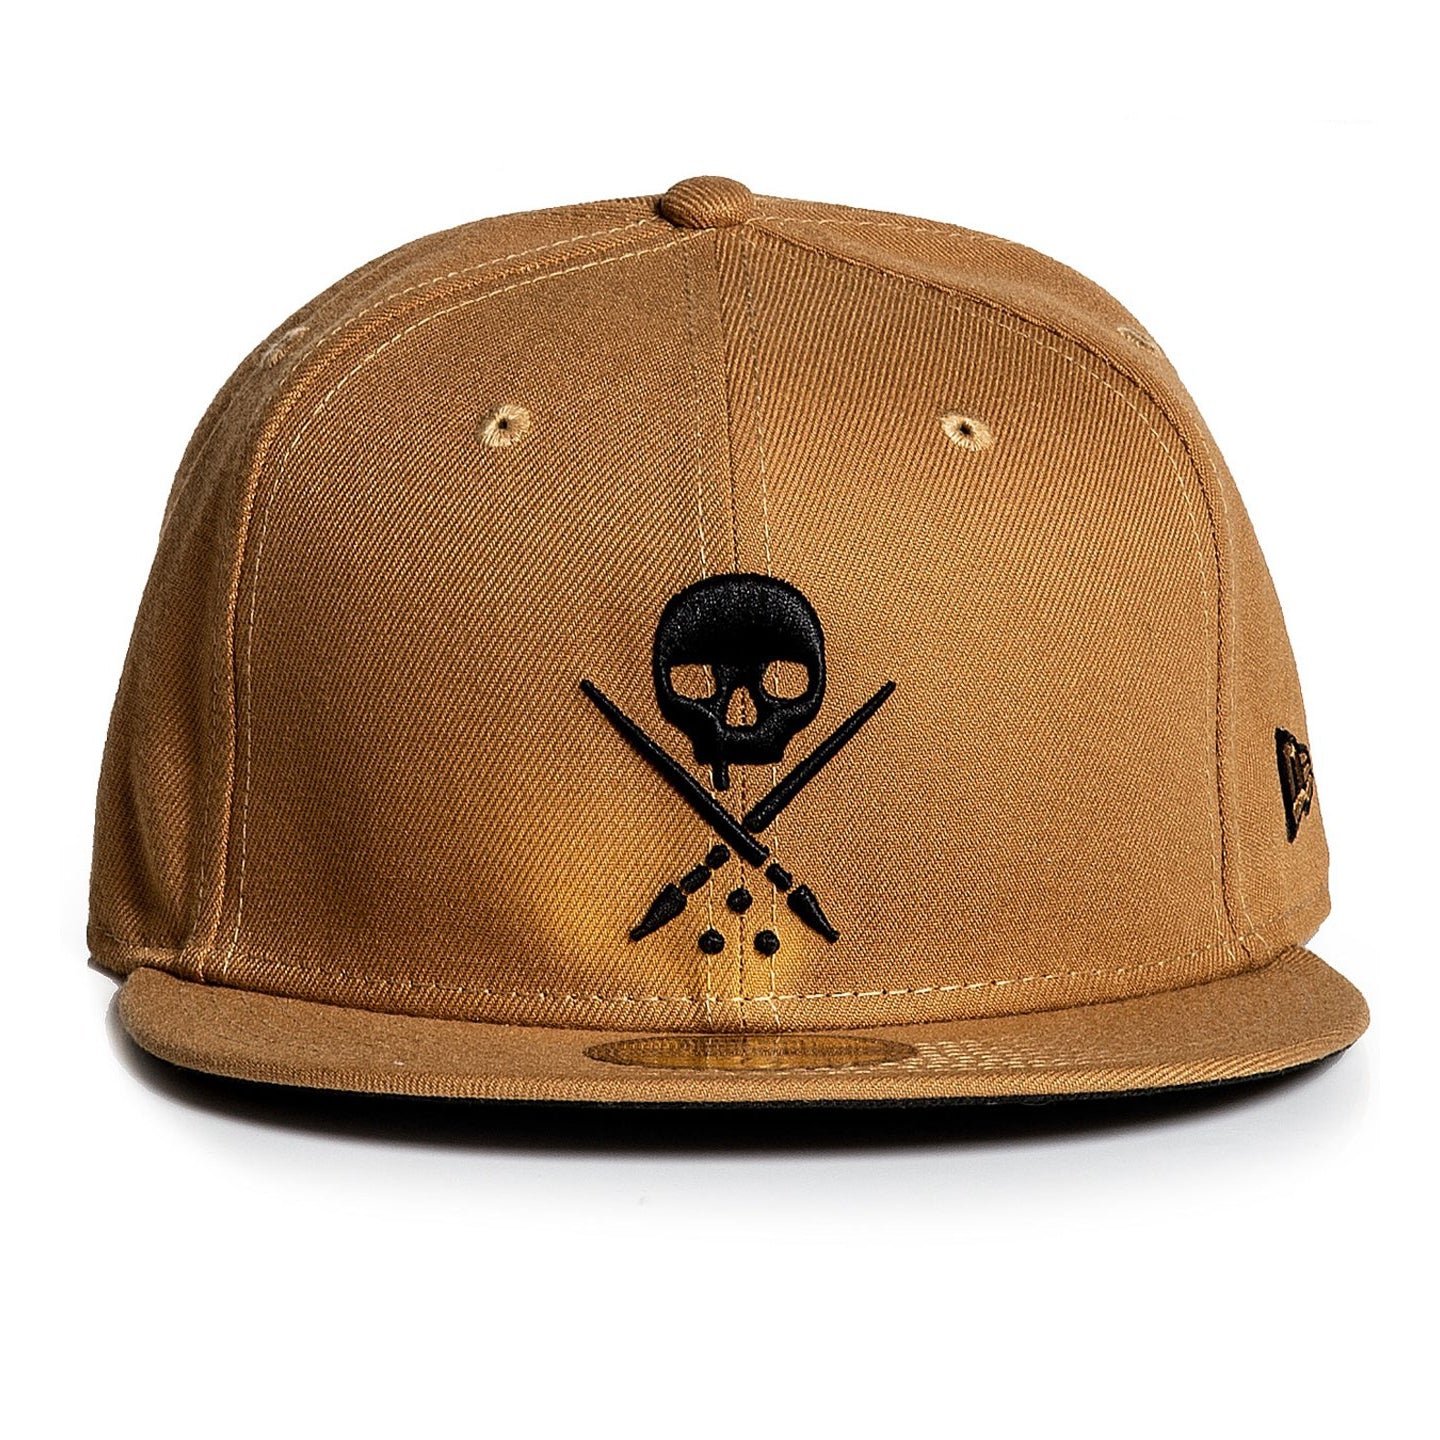 Sullen Badge Wheat Stretched Fitted Cap-Mens Beanies, Hats & Snapback Caps-Scarlett Dawn